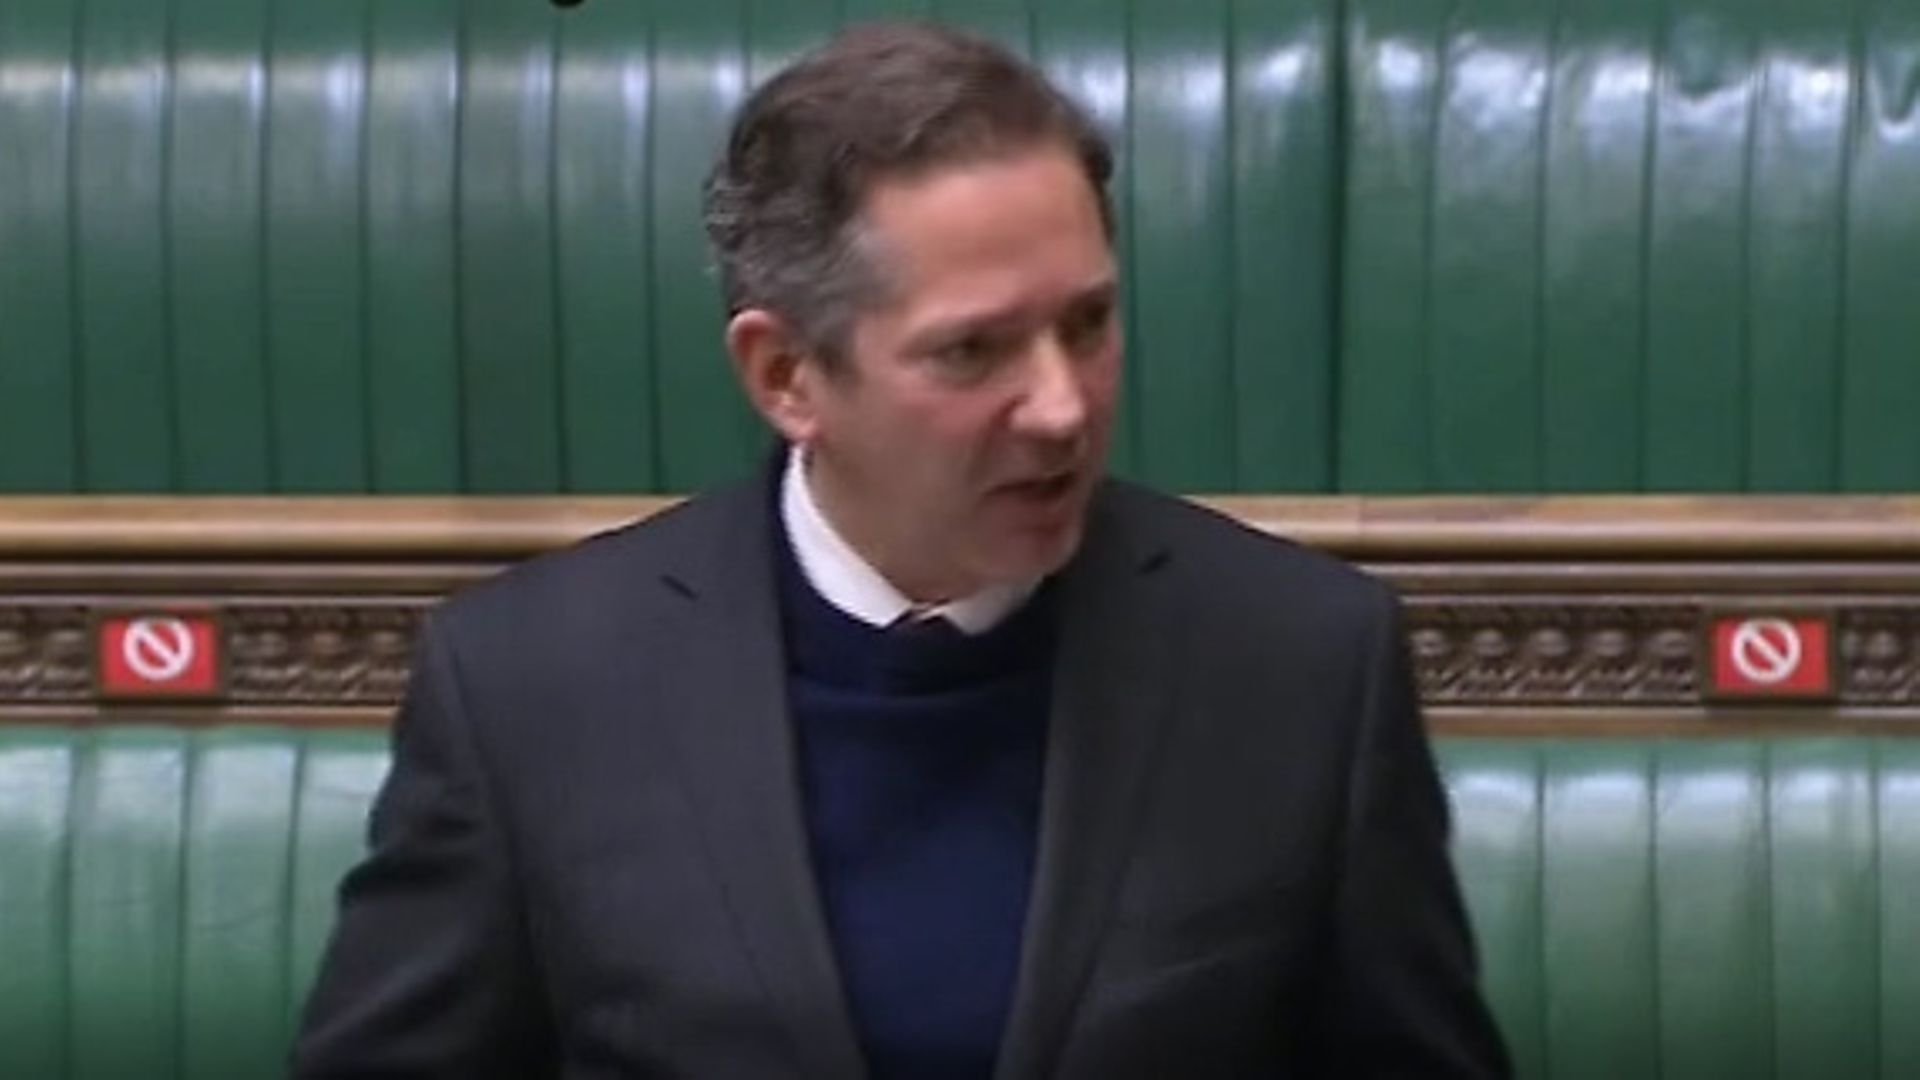 Jonathan Djanogly in the House of Commons - Credit: Parliament Live